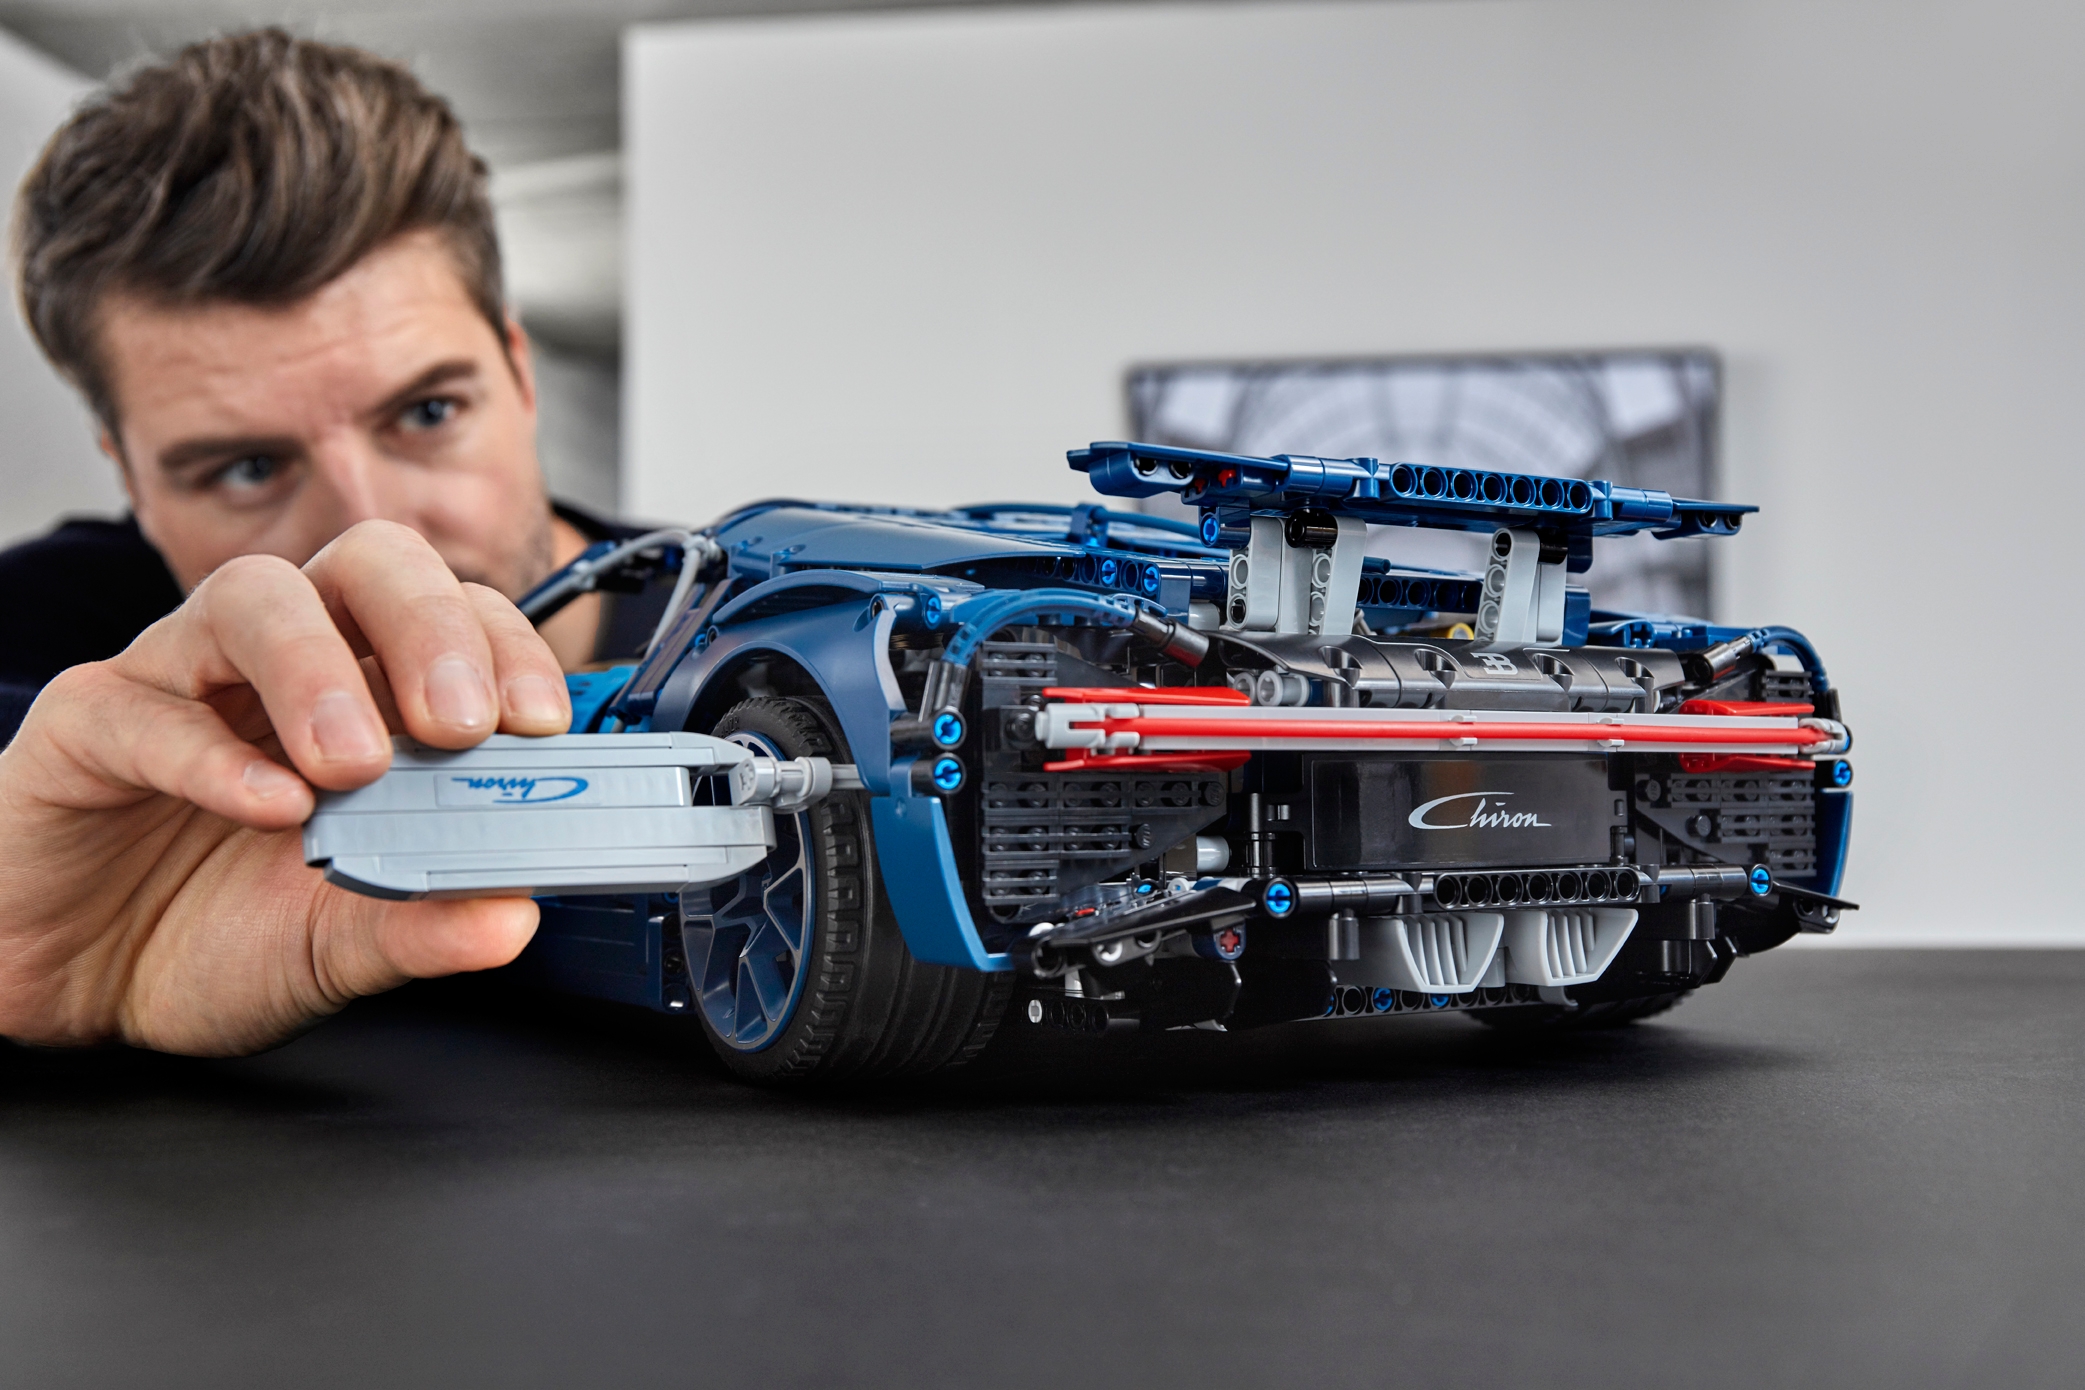 Bugatti Chiron Technic™ Buy online at the Official LEGO® Shop